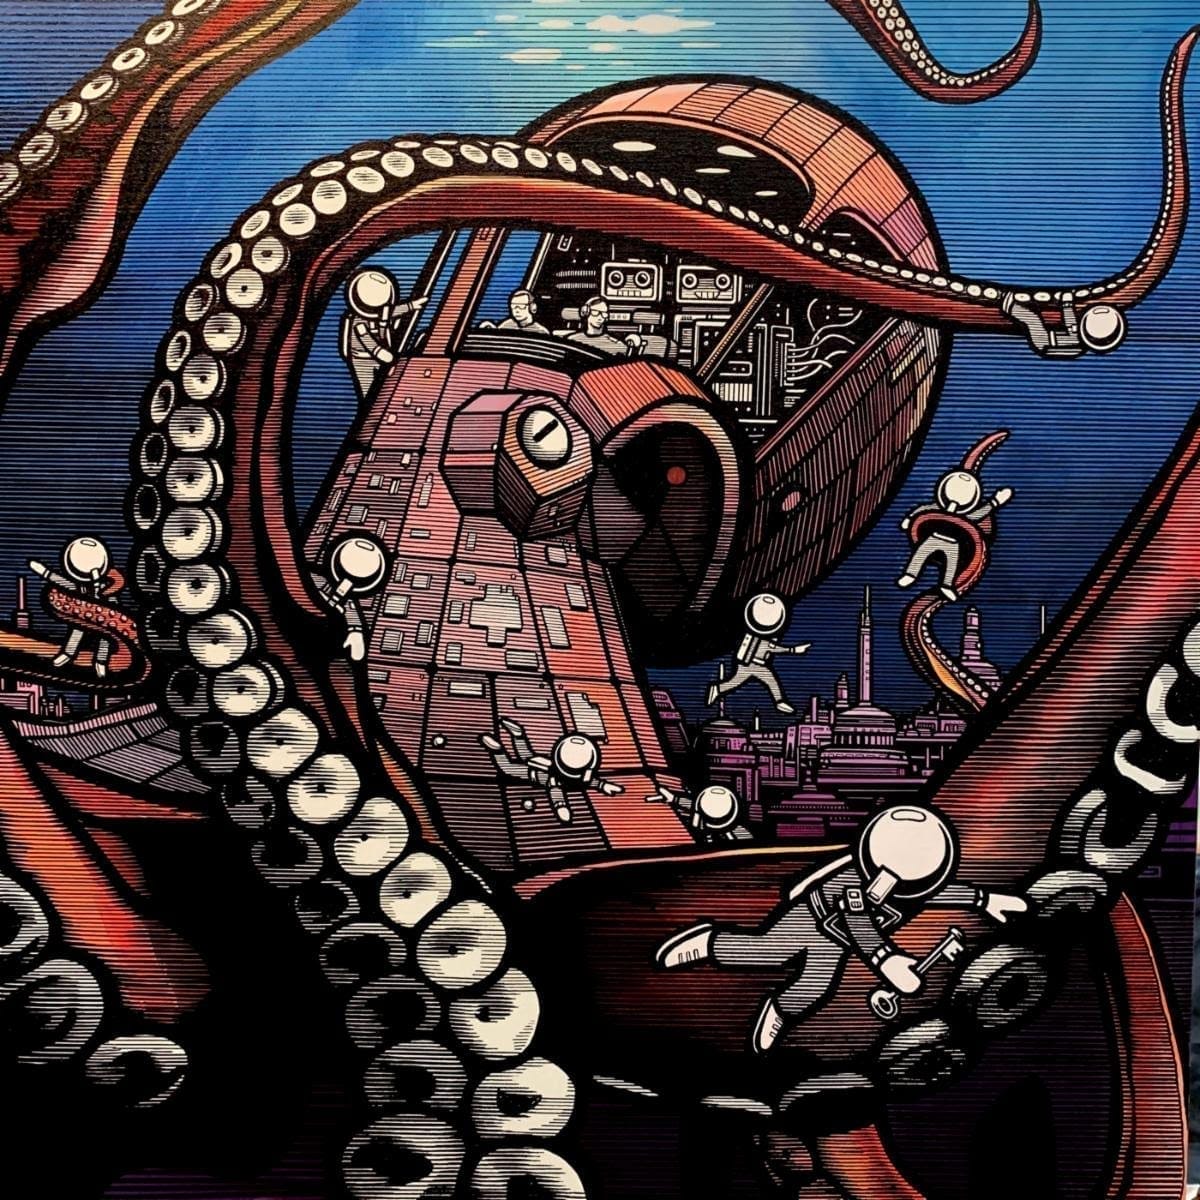 “The Mechanical Kraken Against the Minions” by The London Police